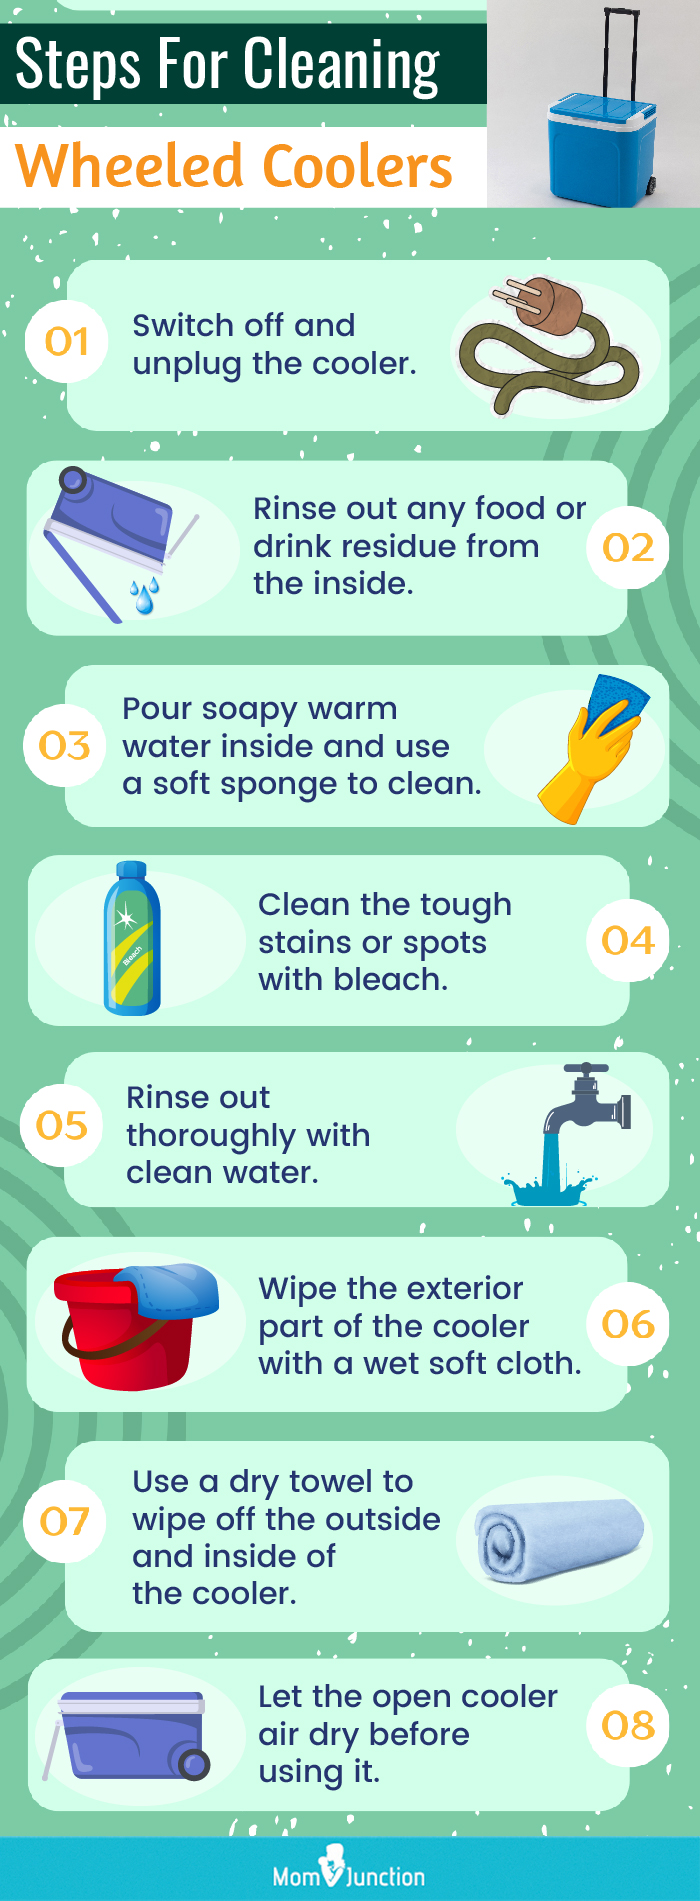 Steps For Cleaning Wheeled Coolers (infographic)